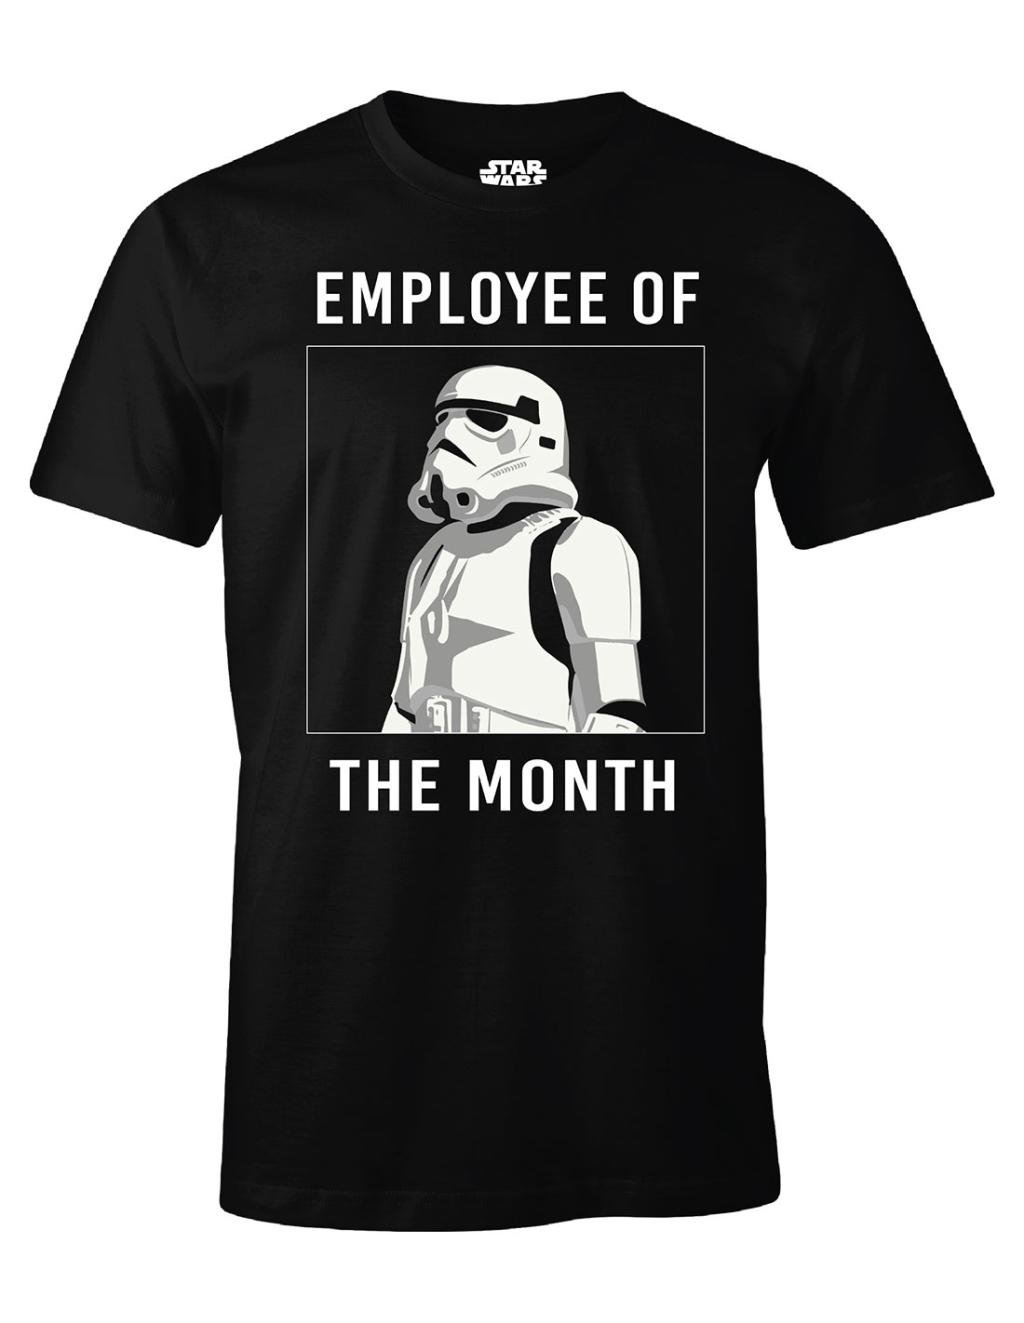 STAR WARS - Employee of the month - T-Shirt (XL)